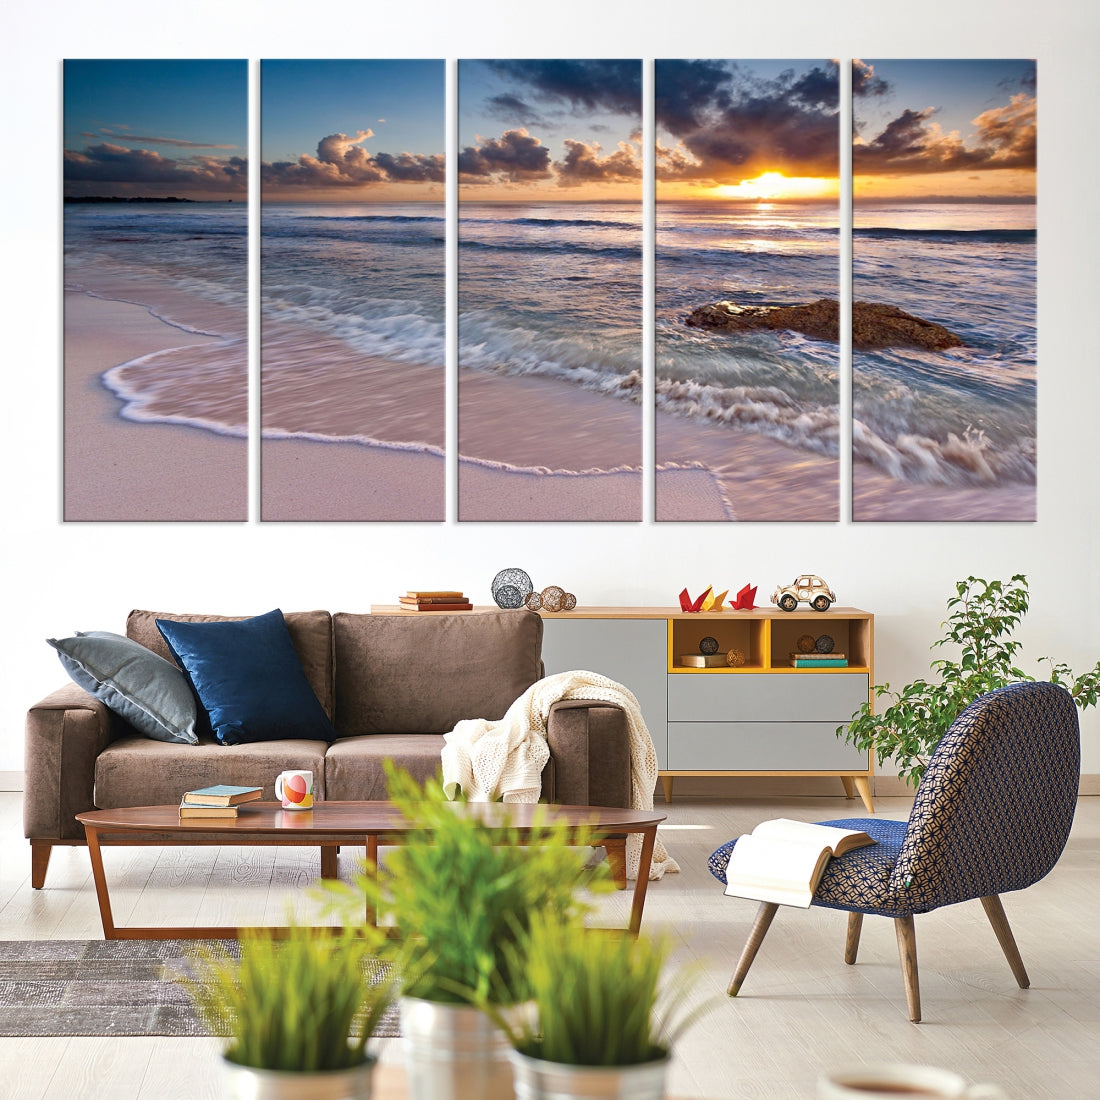 Extra Large Ocean Sunset Sea Holiday Beach Wall Art Canvas Print for Hotel Decoration